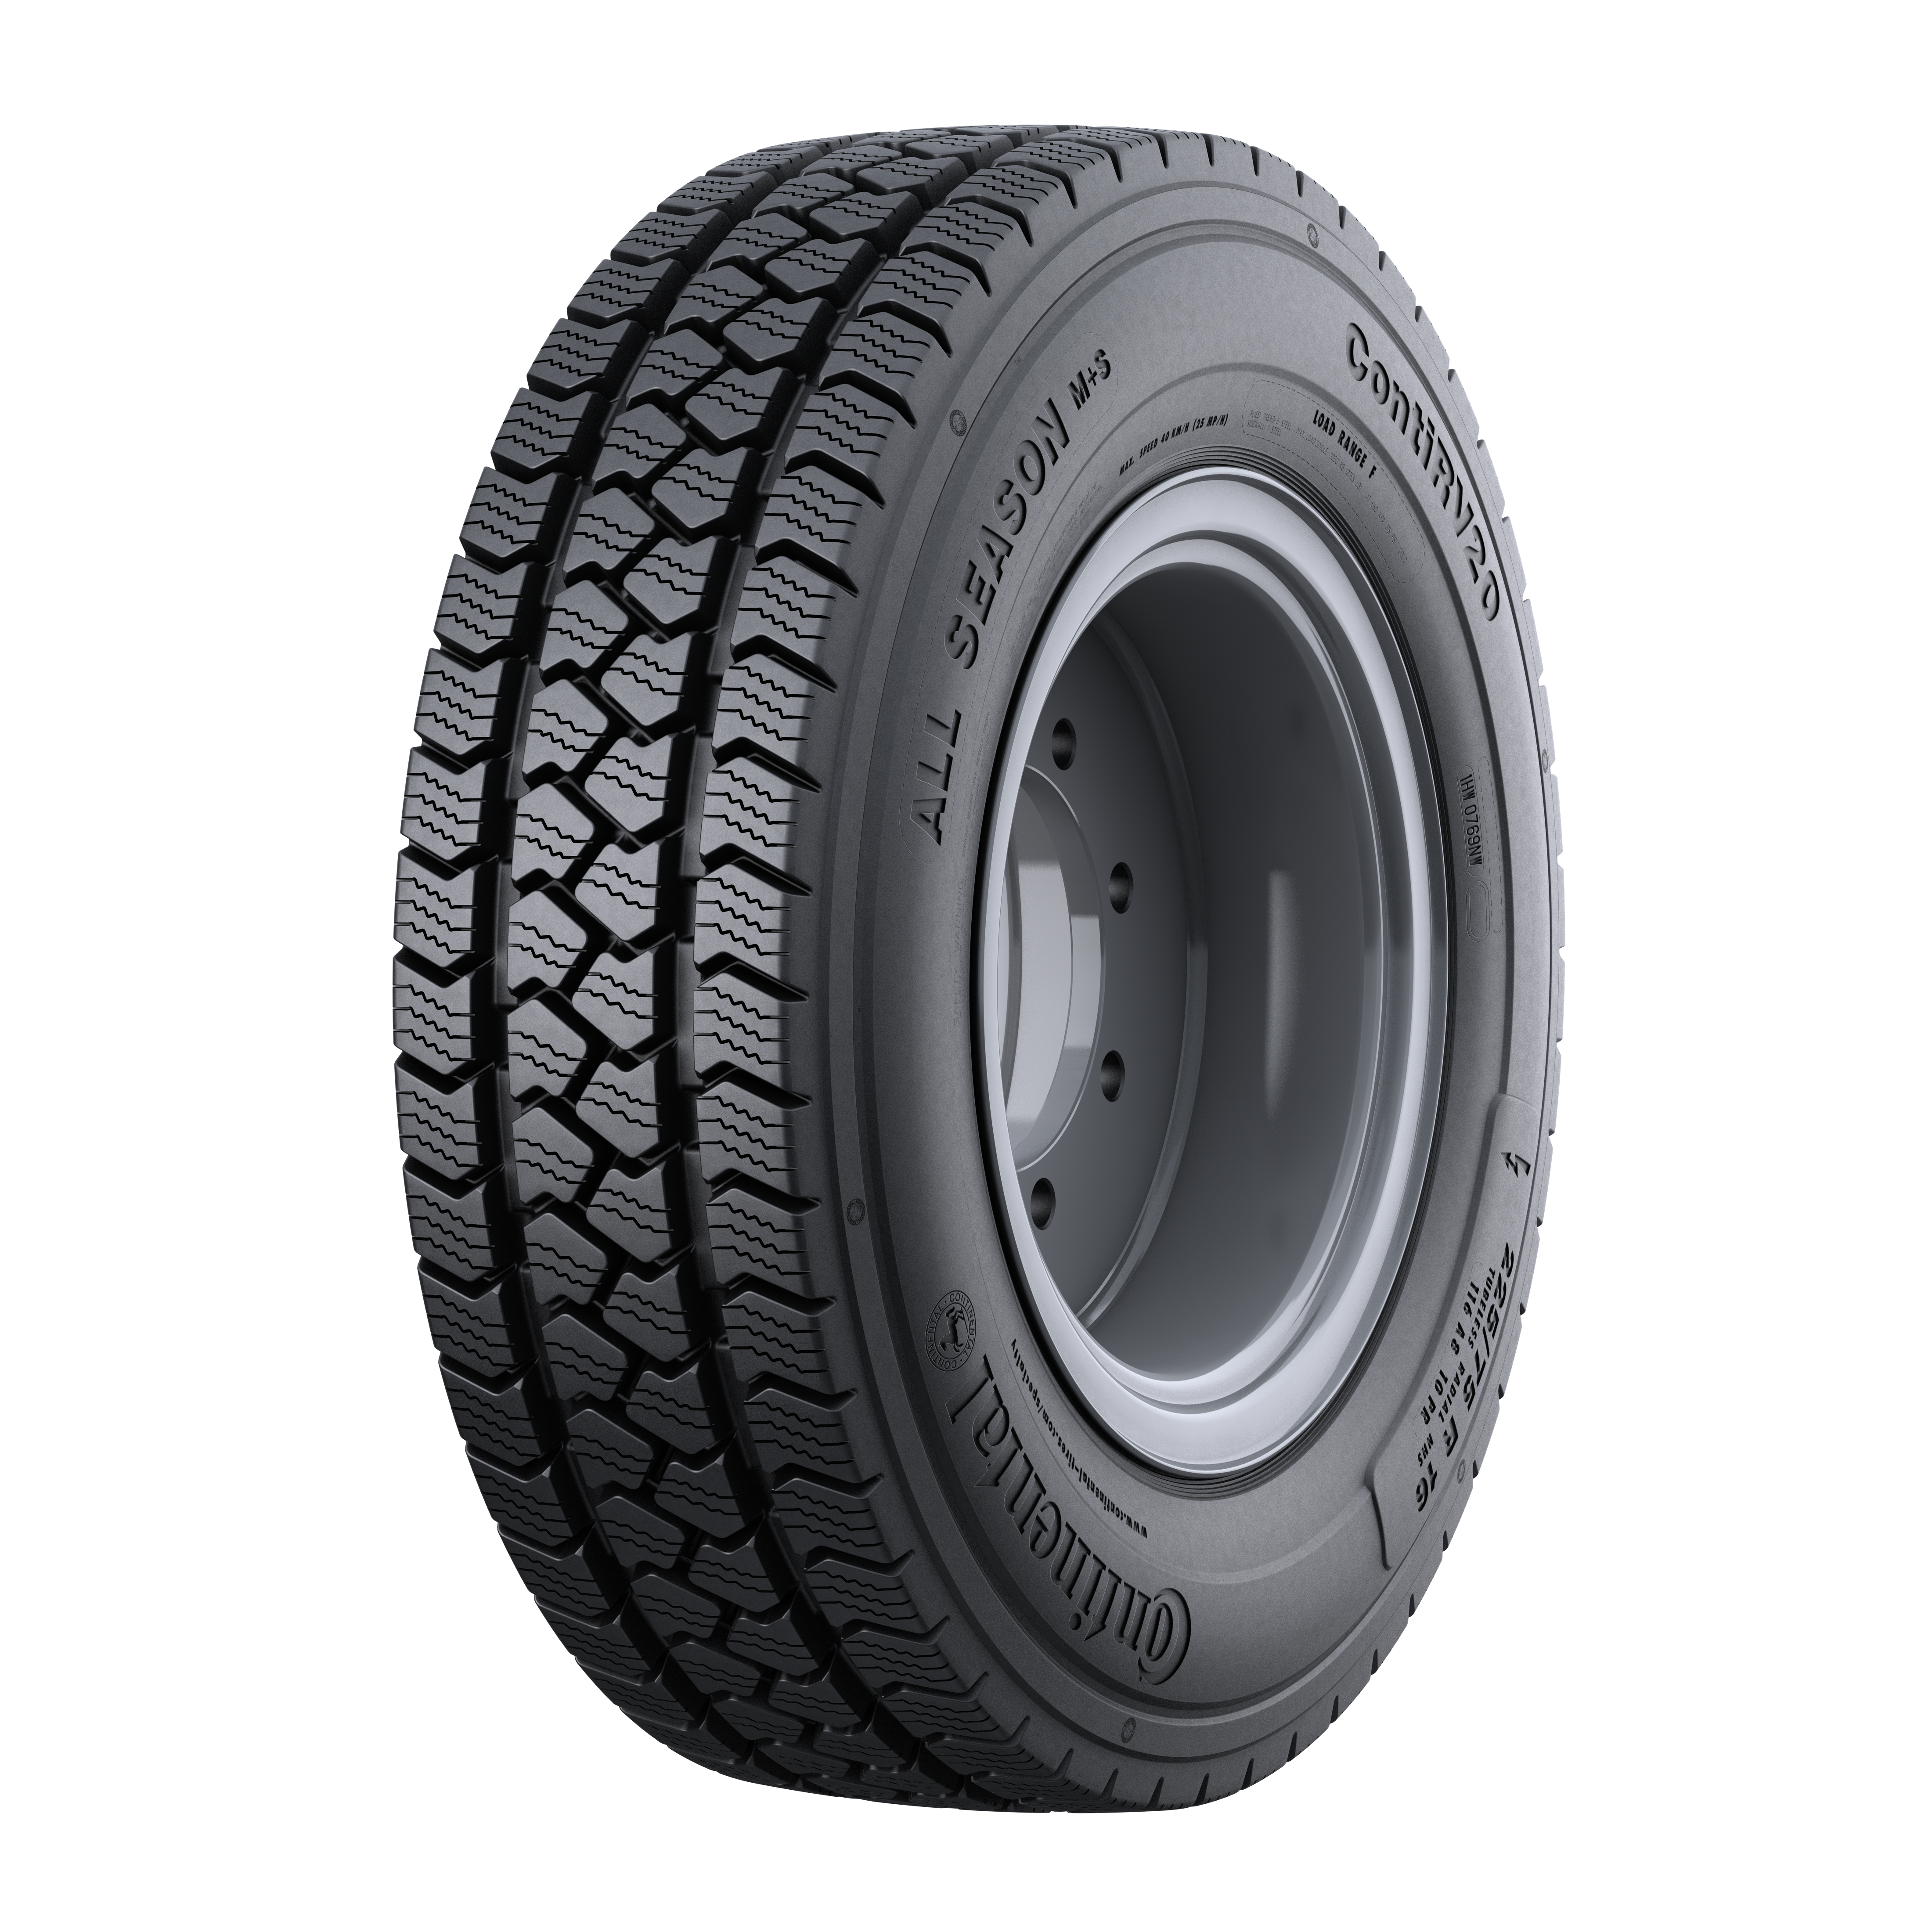 Conti launches airport ground support tyre